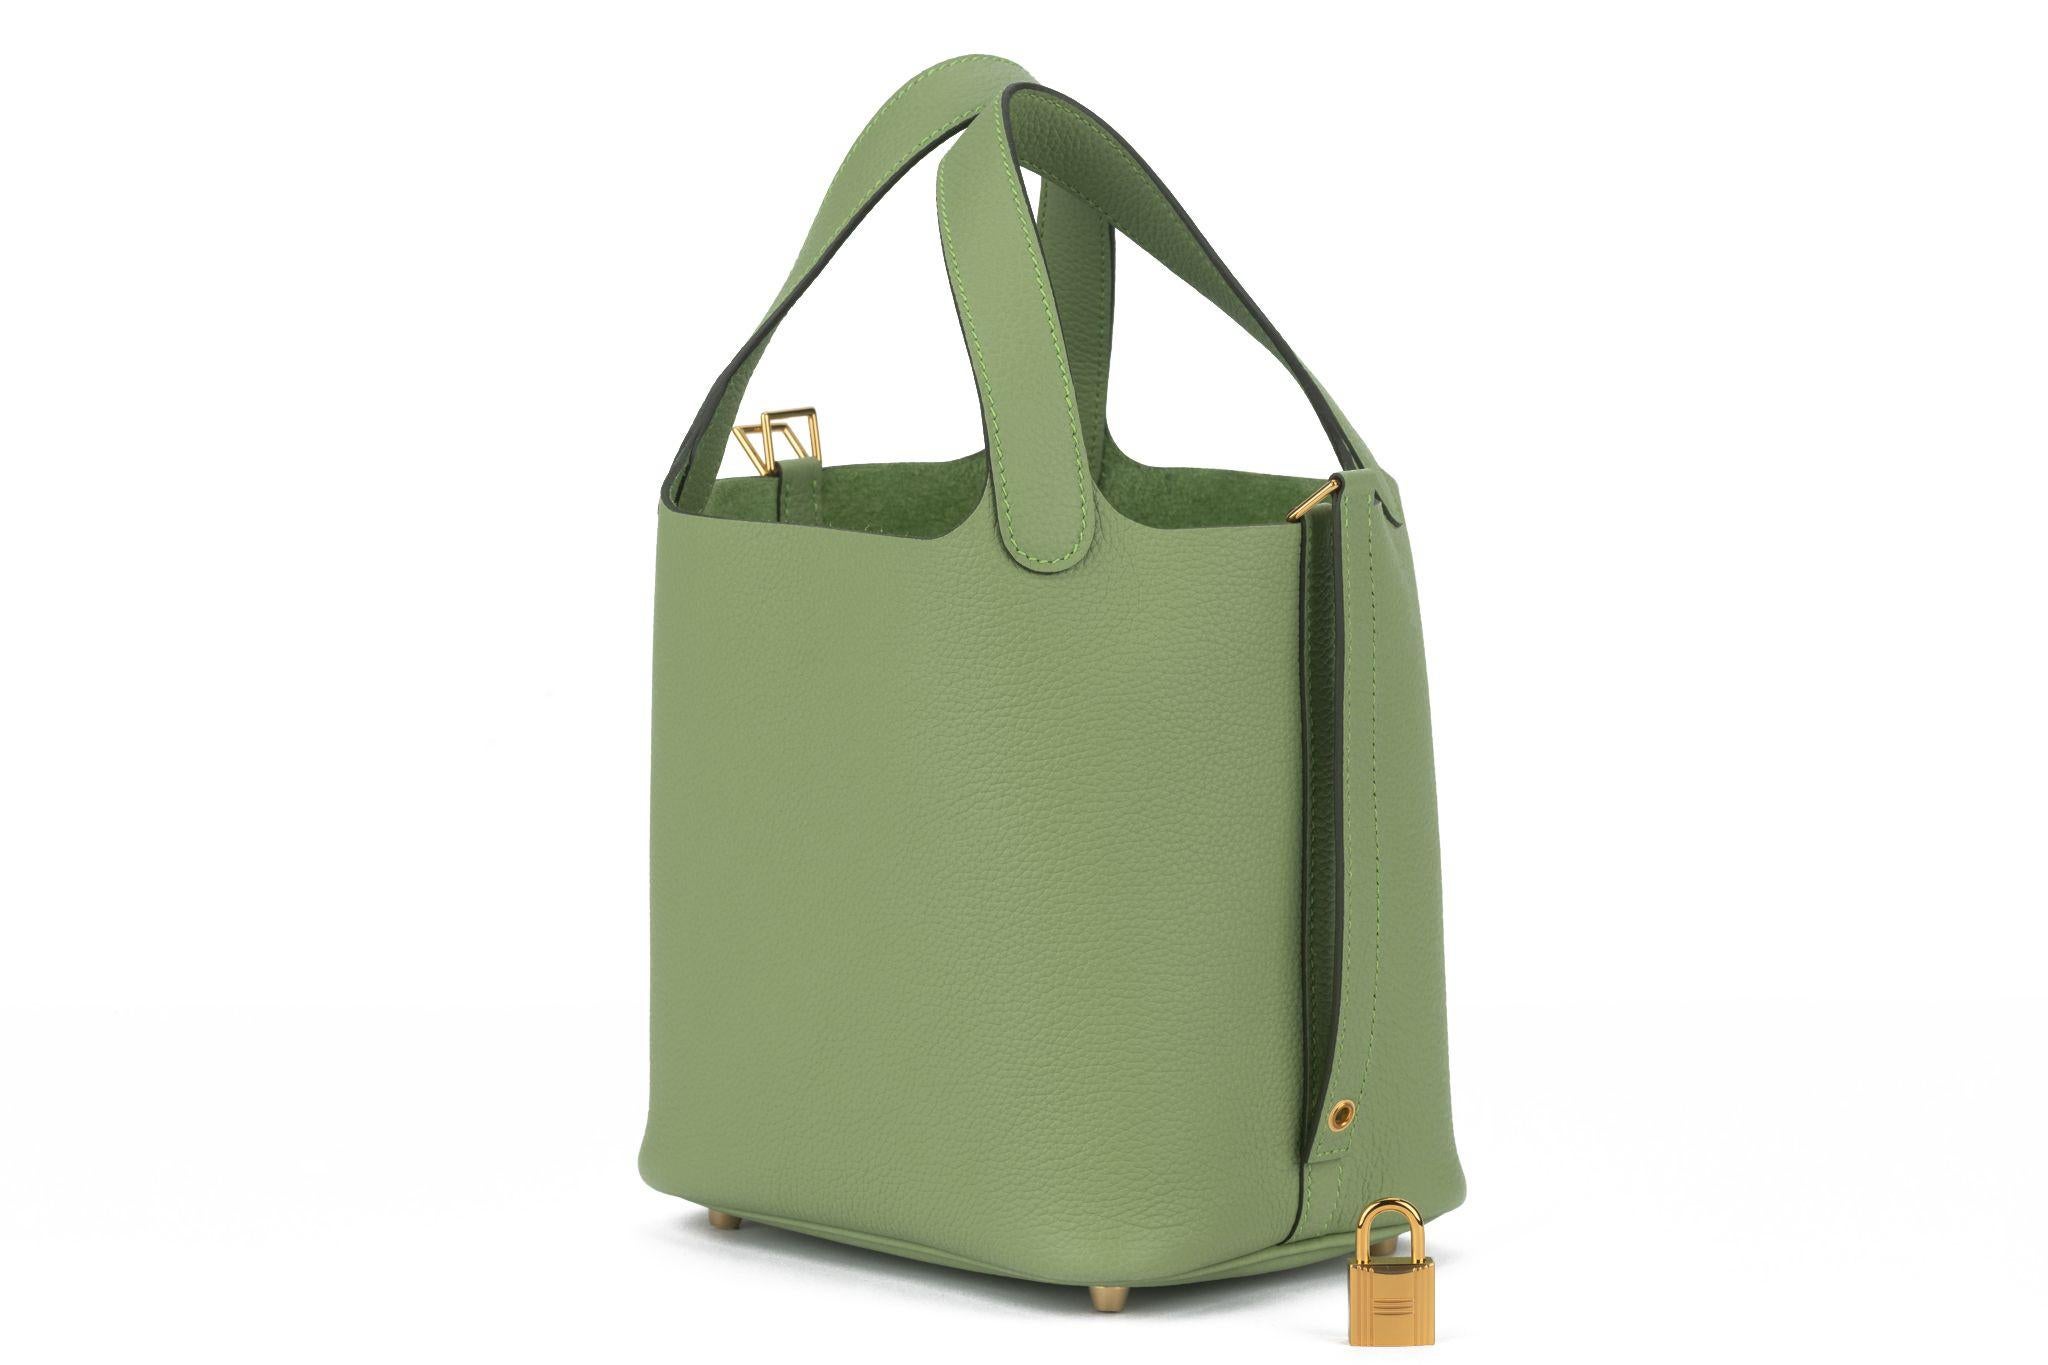 Hermès Picotin 18 cm Lock bag in clemence leather and the color vert criquet . The Hardware is gold. Date stamp B for 2023. The bag is brand new and comes with the lock, original dustcover, booklet and box.